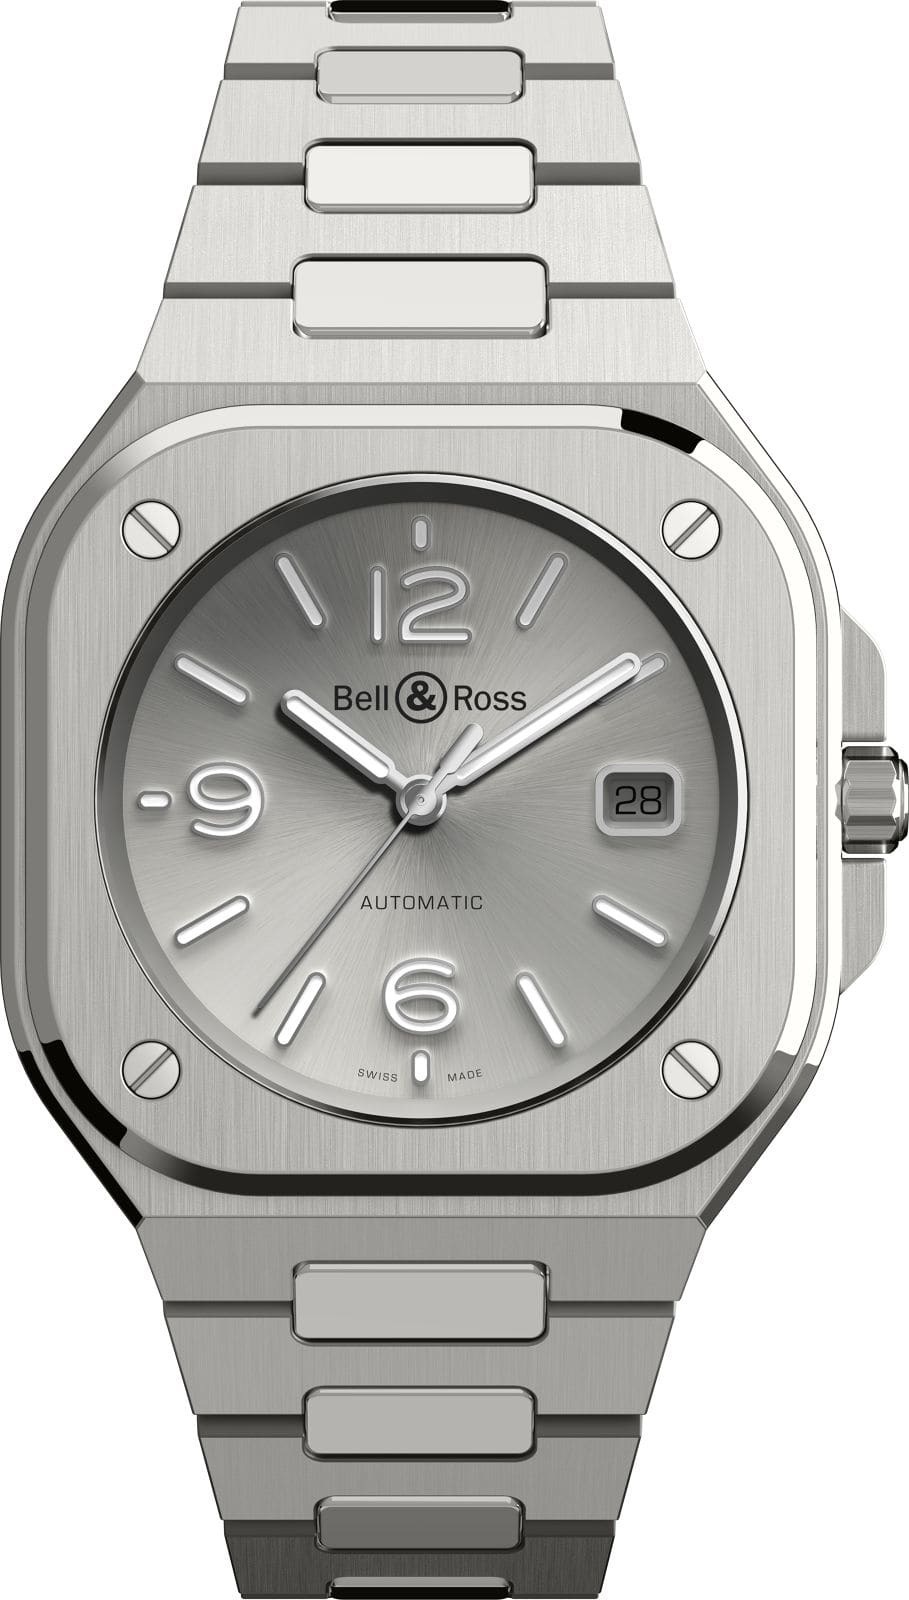 Bell & Ross BR 05 Grey on Bracelet - Exquisite Timepieces